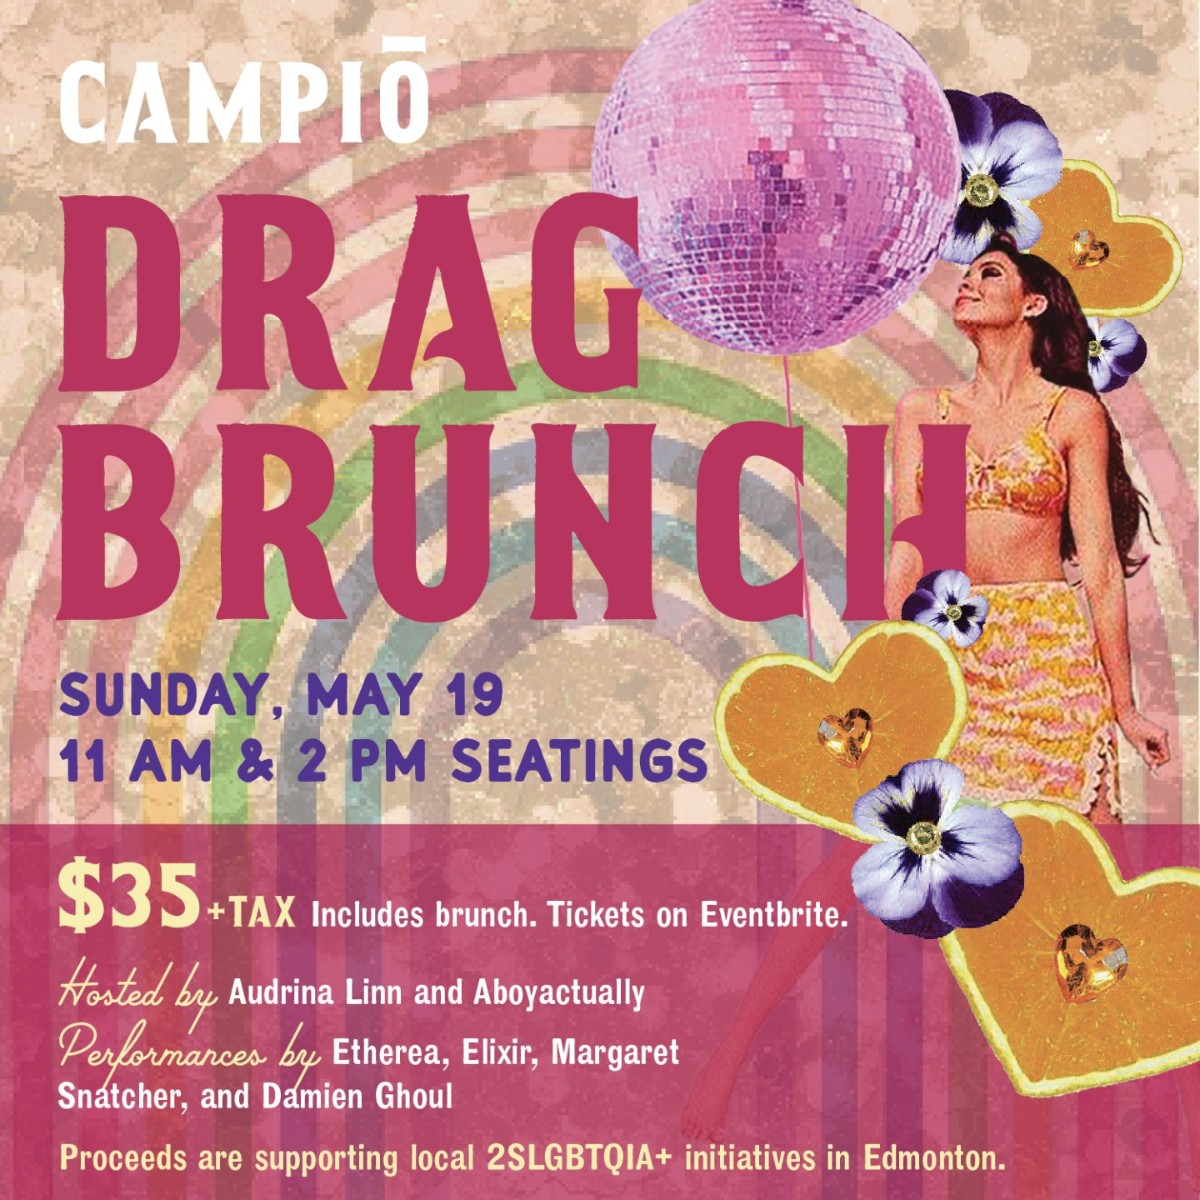 Sashay your way to Campio for Drag Brunch on Sunday, May 19! 🏳️‍🌈 A fundraiser with proceeds supporting local 2SLGBTQIA+ initiatives in Edmonton! ✨ Get your tickets here: brnw.ch/21wJeTc